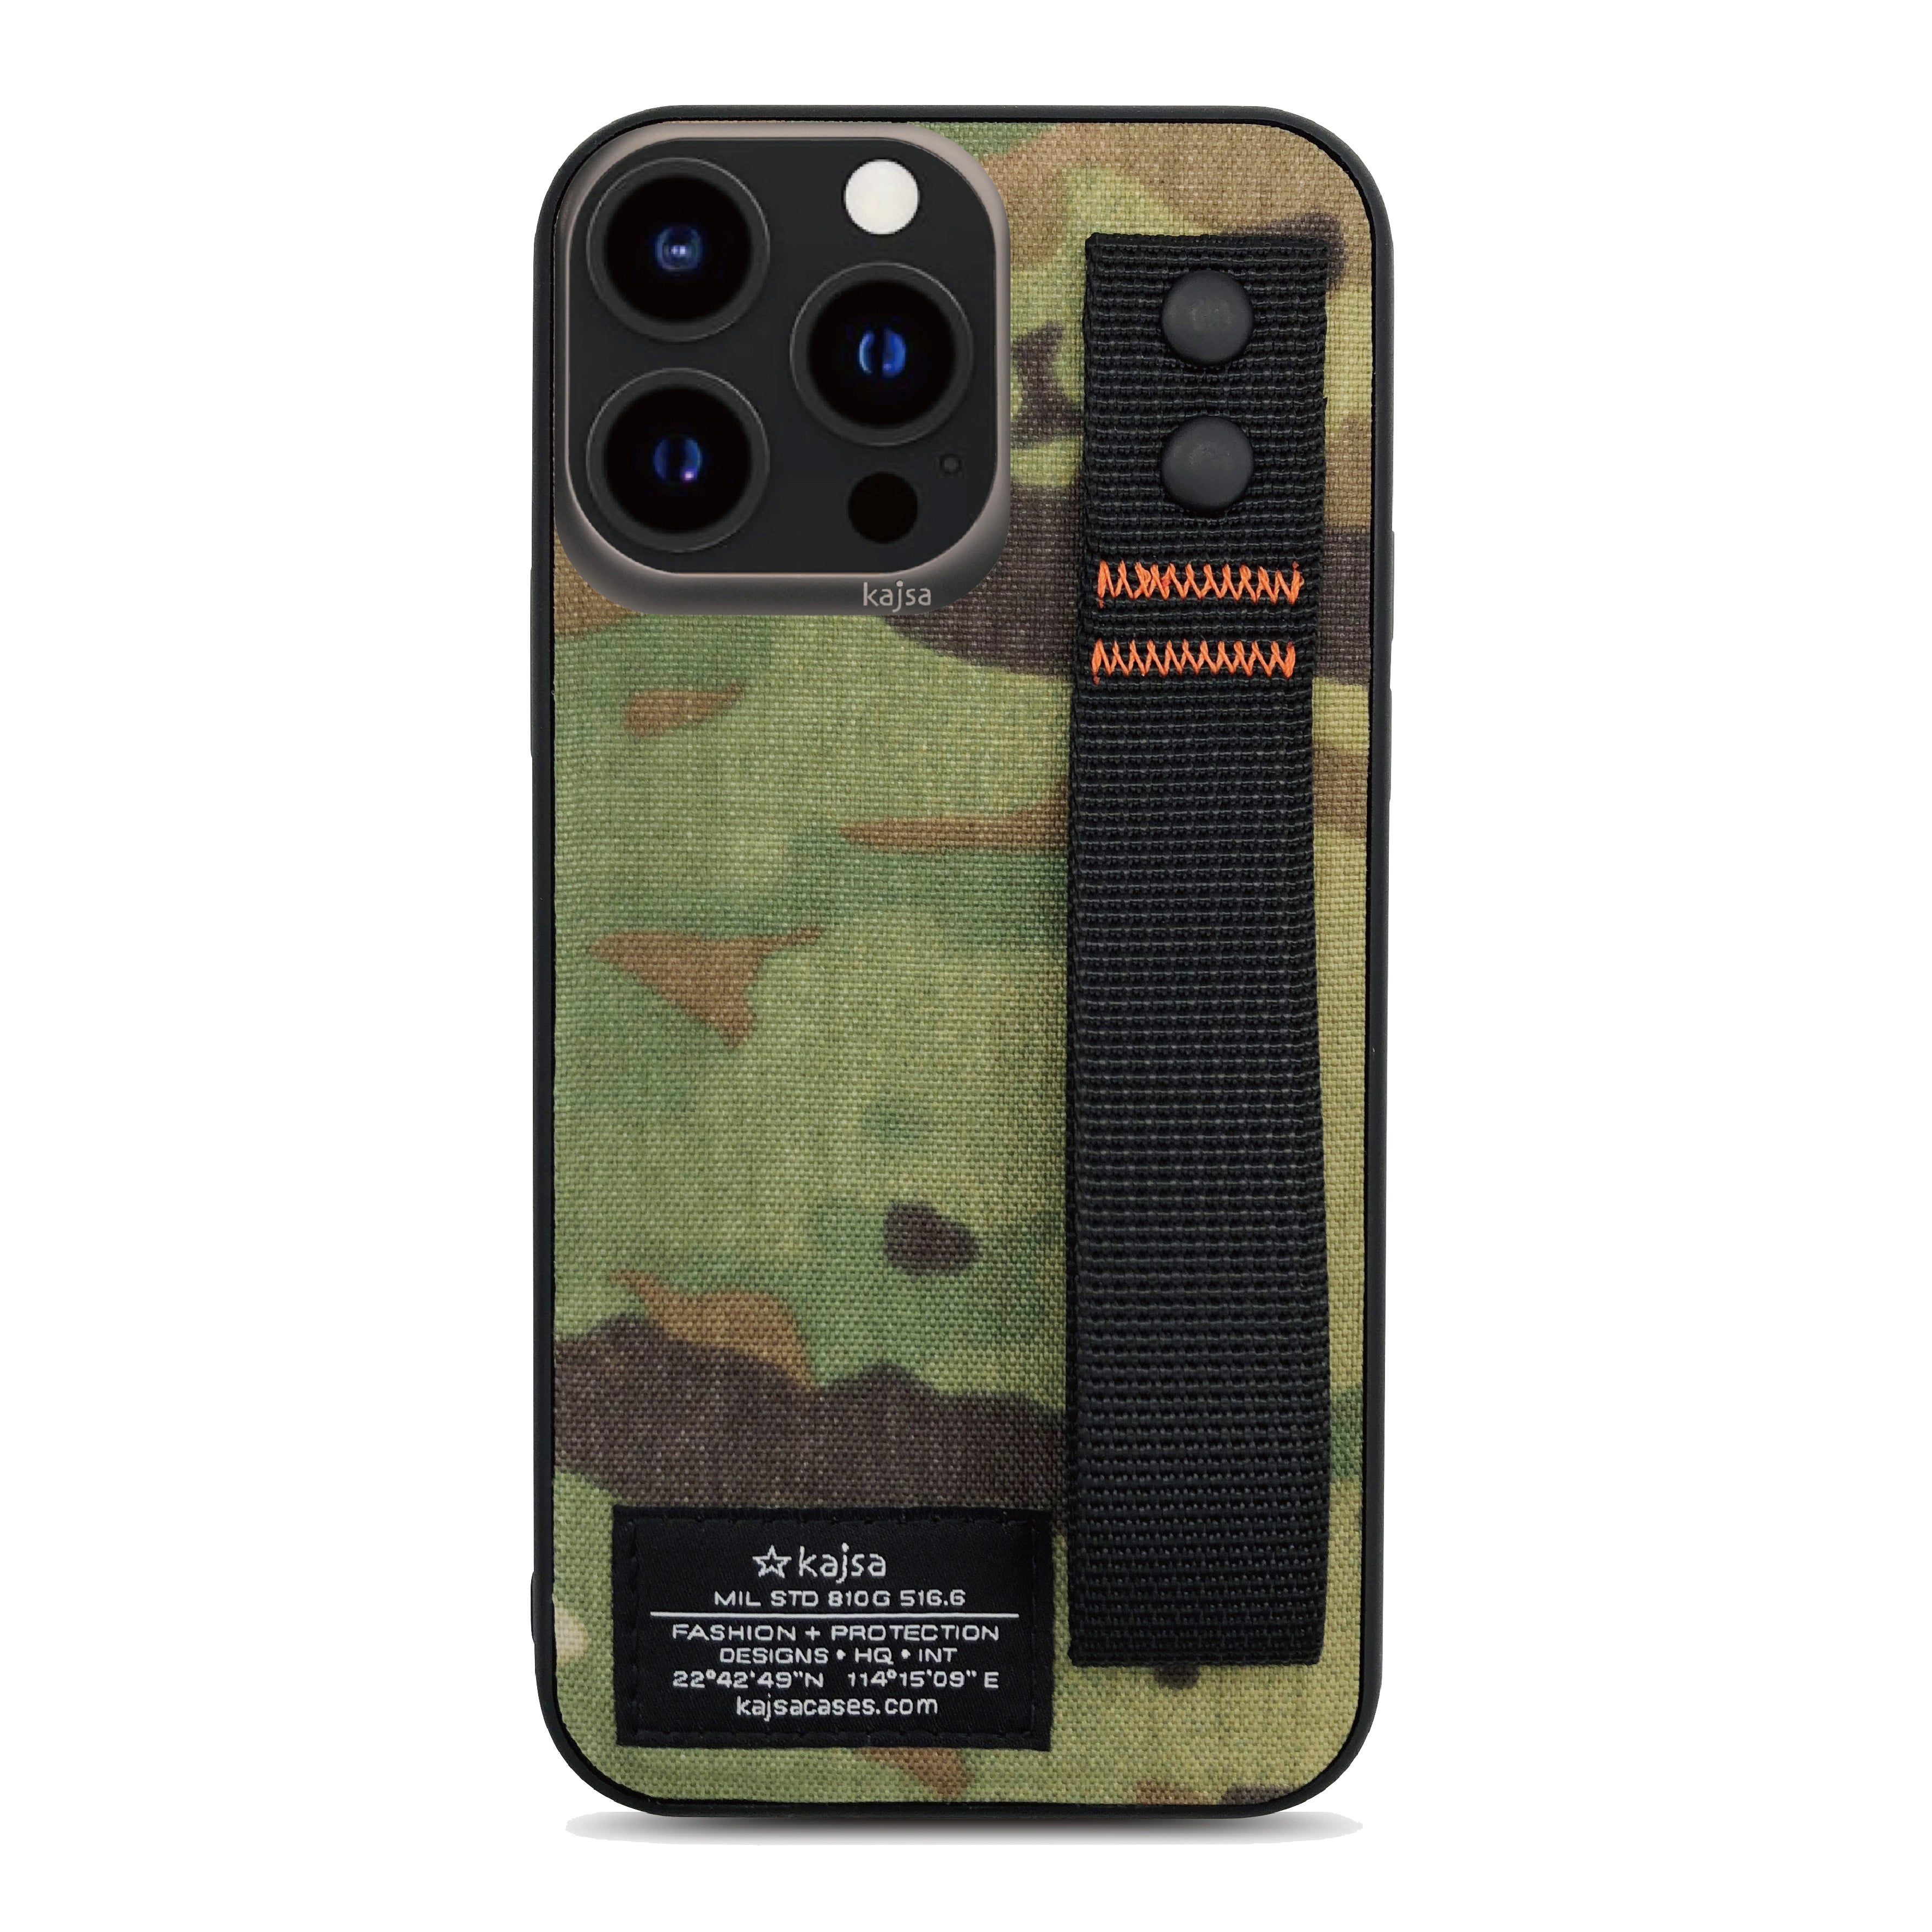 Military Collection - Straps Back Case for iPhone 13-Phone Case- phone case - phone cases- phone cover- iphone cover- iphone case- iphone cases- leather case- leather cases- DIYCASE - custom case - leather cover - hand strap case - croco pattern case - snake pattern case - carbon fiber phone case - phone case brand - unique phone case - high quality - phone case brand - protective case - buy phone case hong kong - online buy phone case - iphone‎手機殼 - 客製化手機殼 - samsung ‎手機殼 - 香港手機殼 - 買電話殼